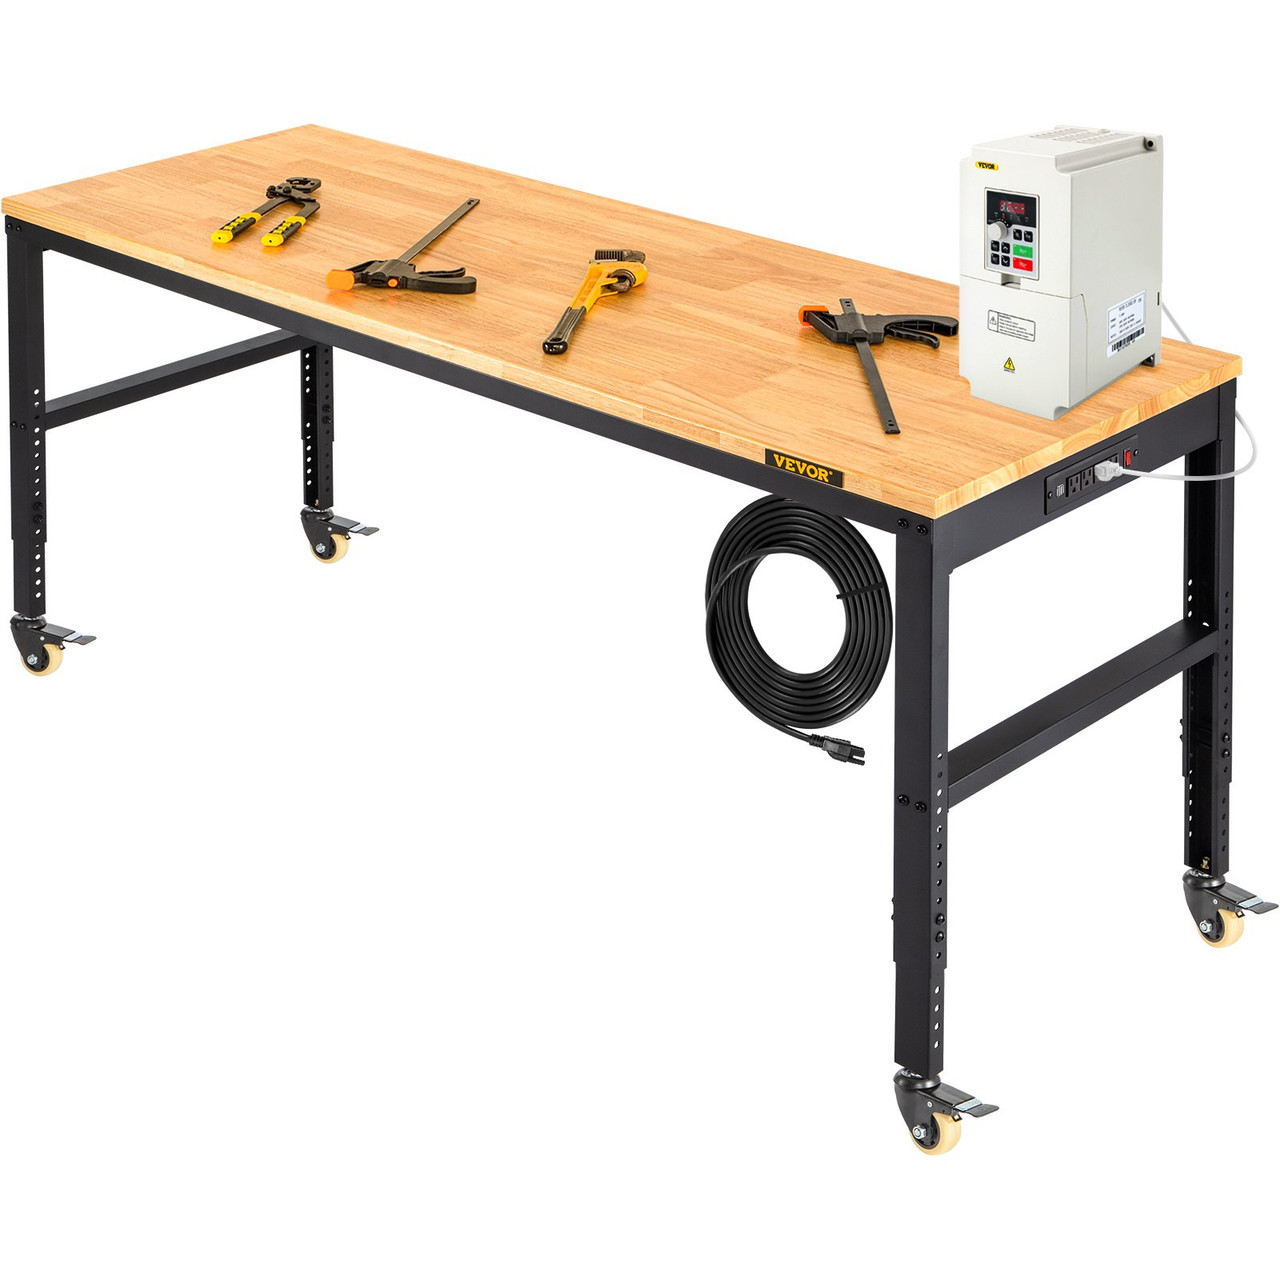 Adjustable Height Workbench 61"L x 20"W Work Bench w/ Power Outlet Casters